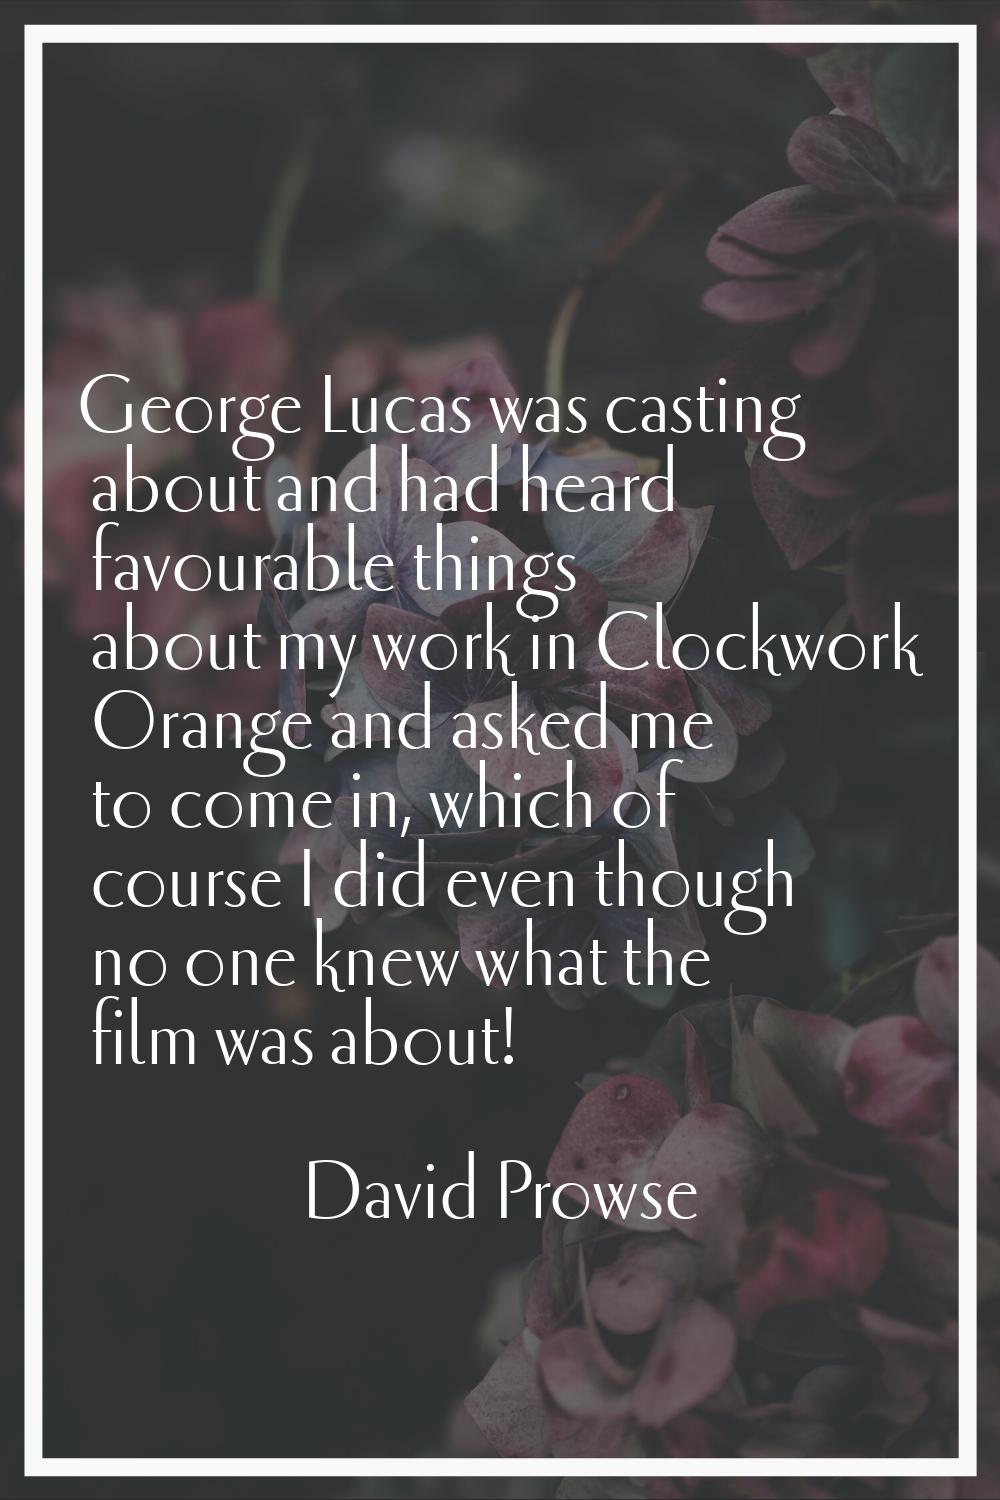 George Lucas was casting about and had heard favourable things about my work in Clockwork Orange an